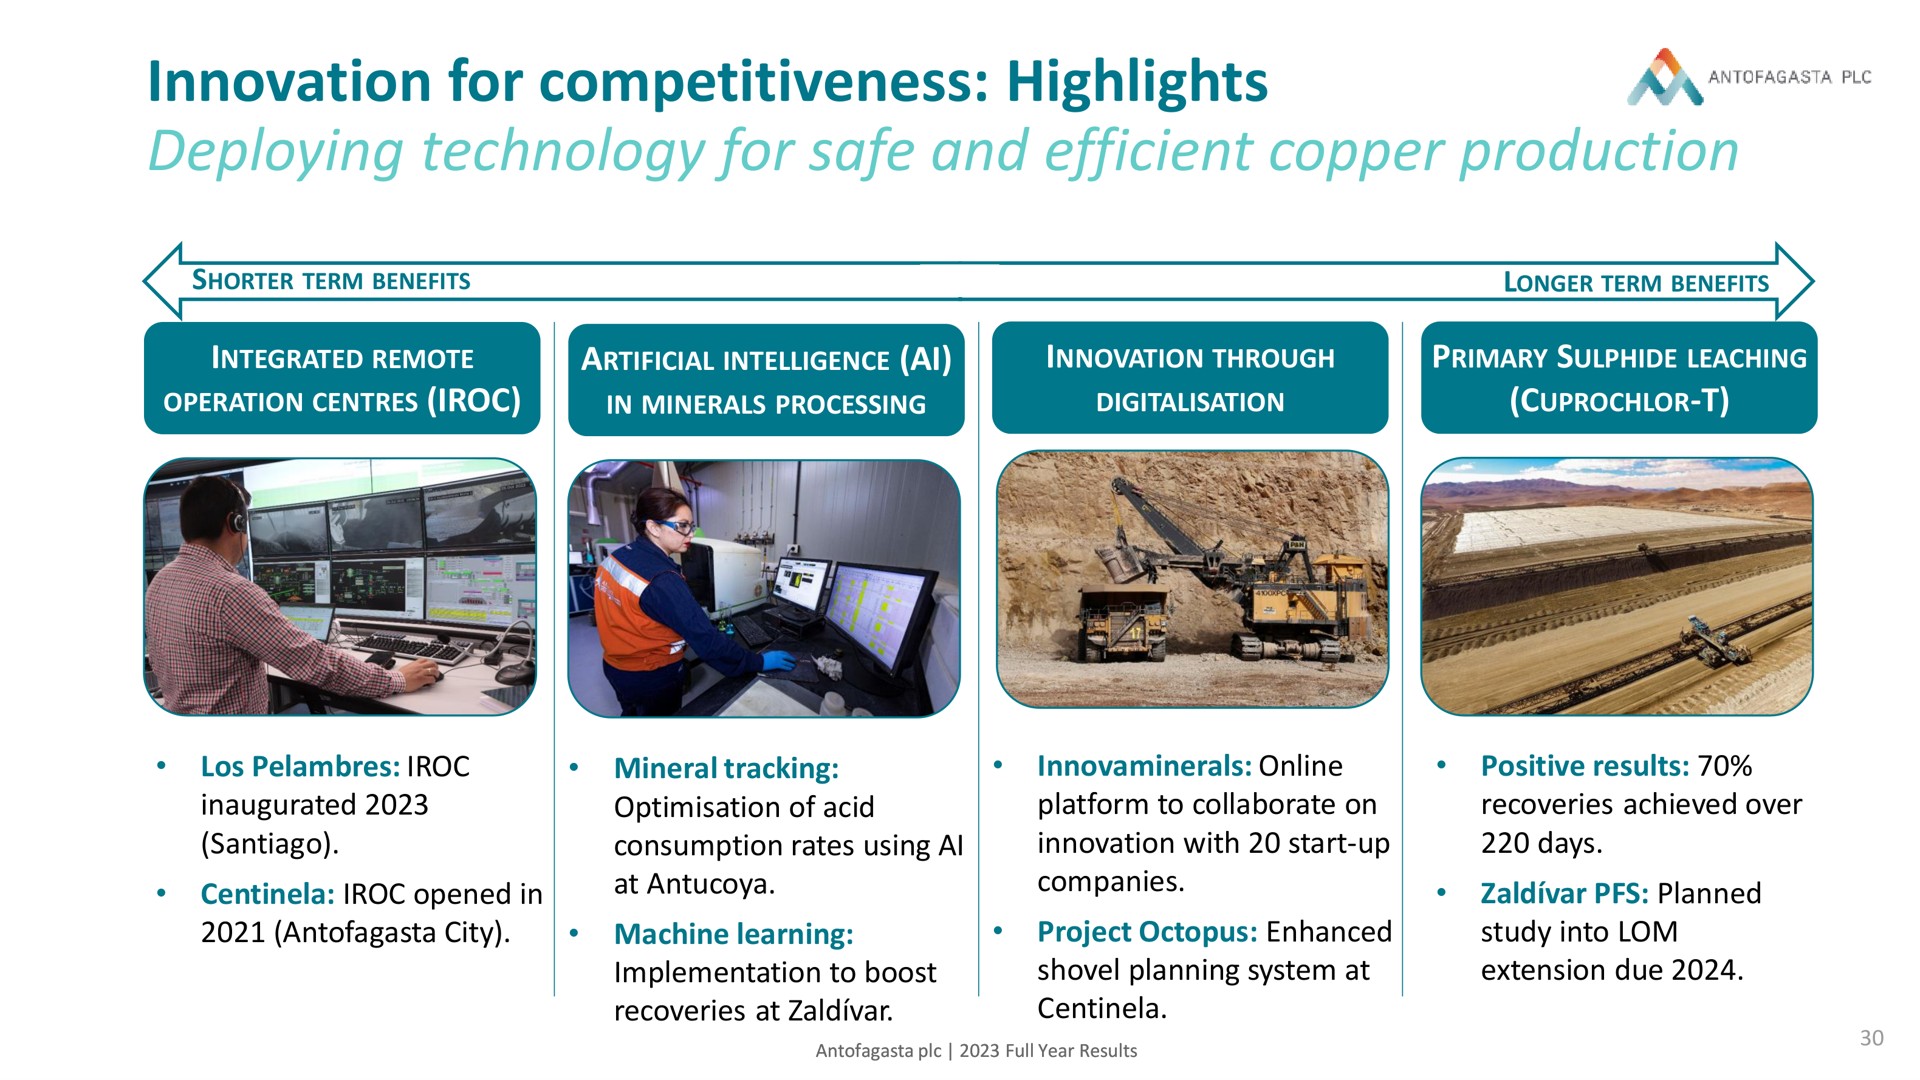 innovation for competitiveness highlights deploying technology for safe and efficient copper production or | Antofagasta